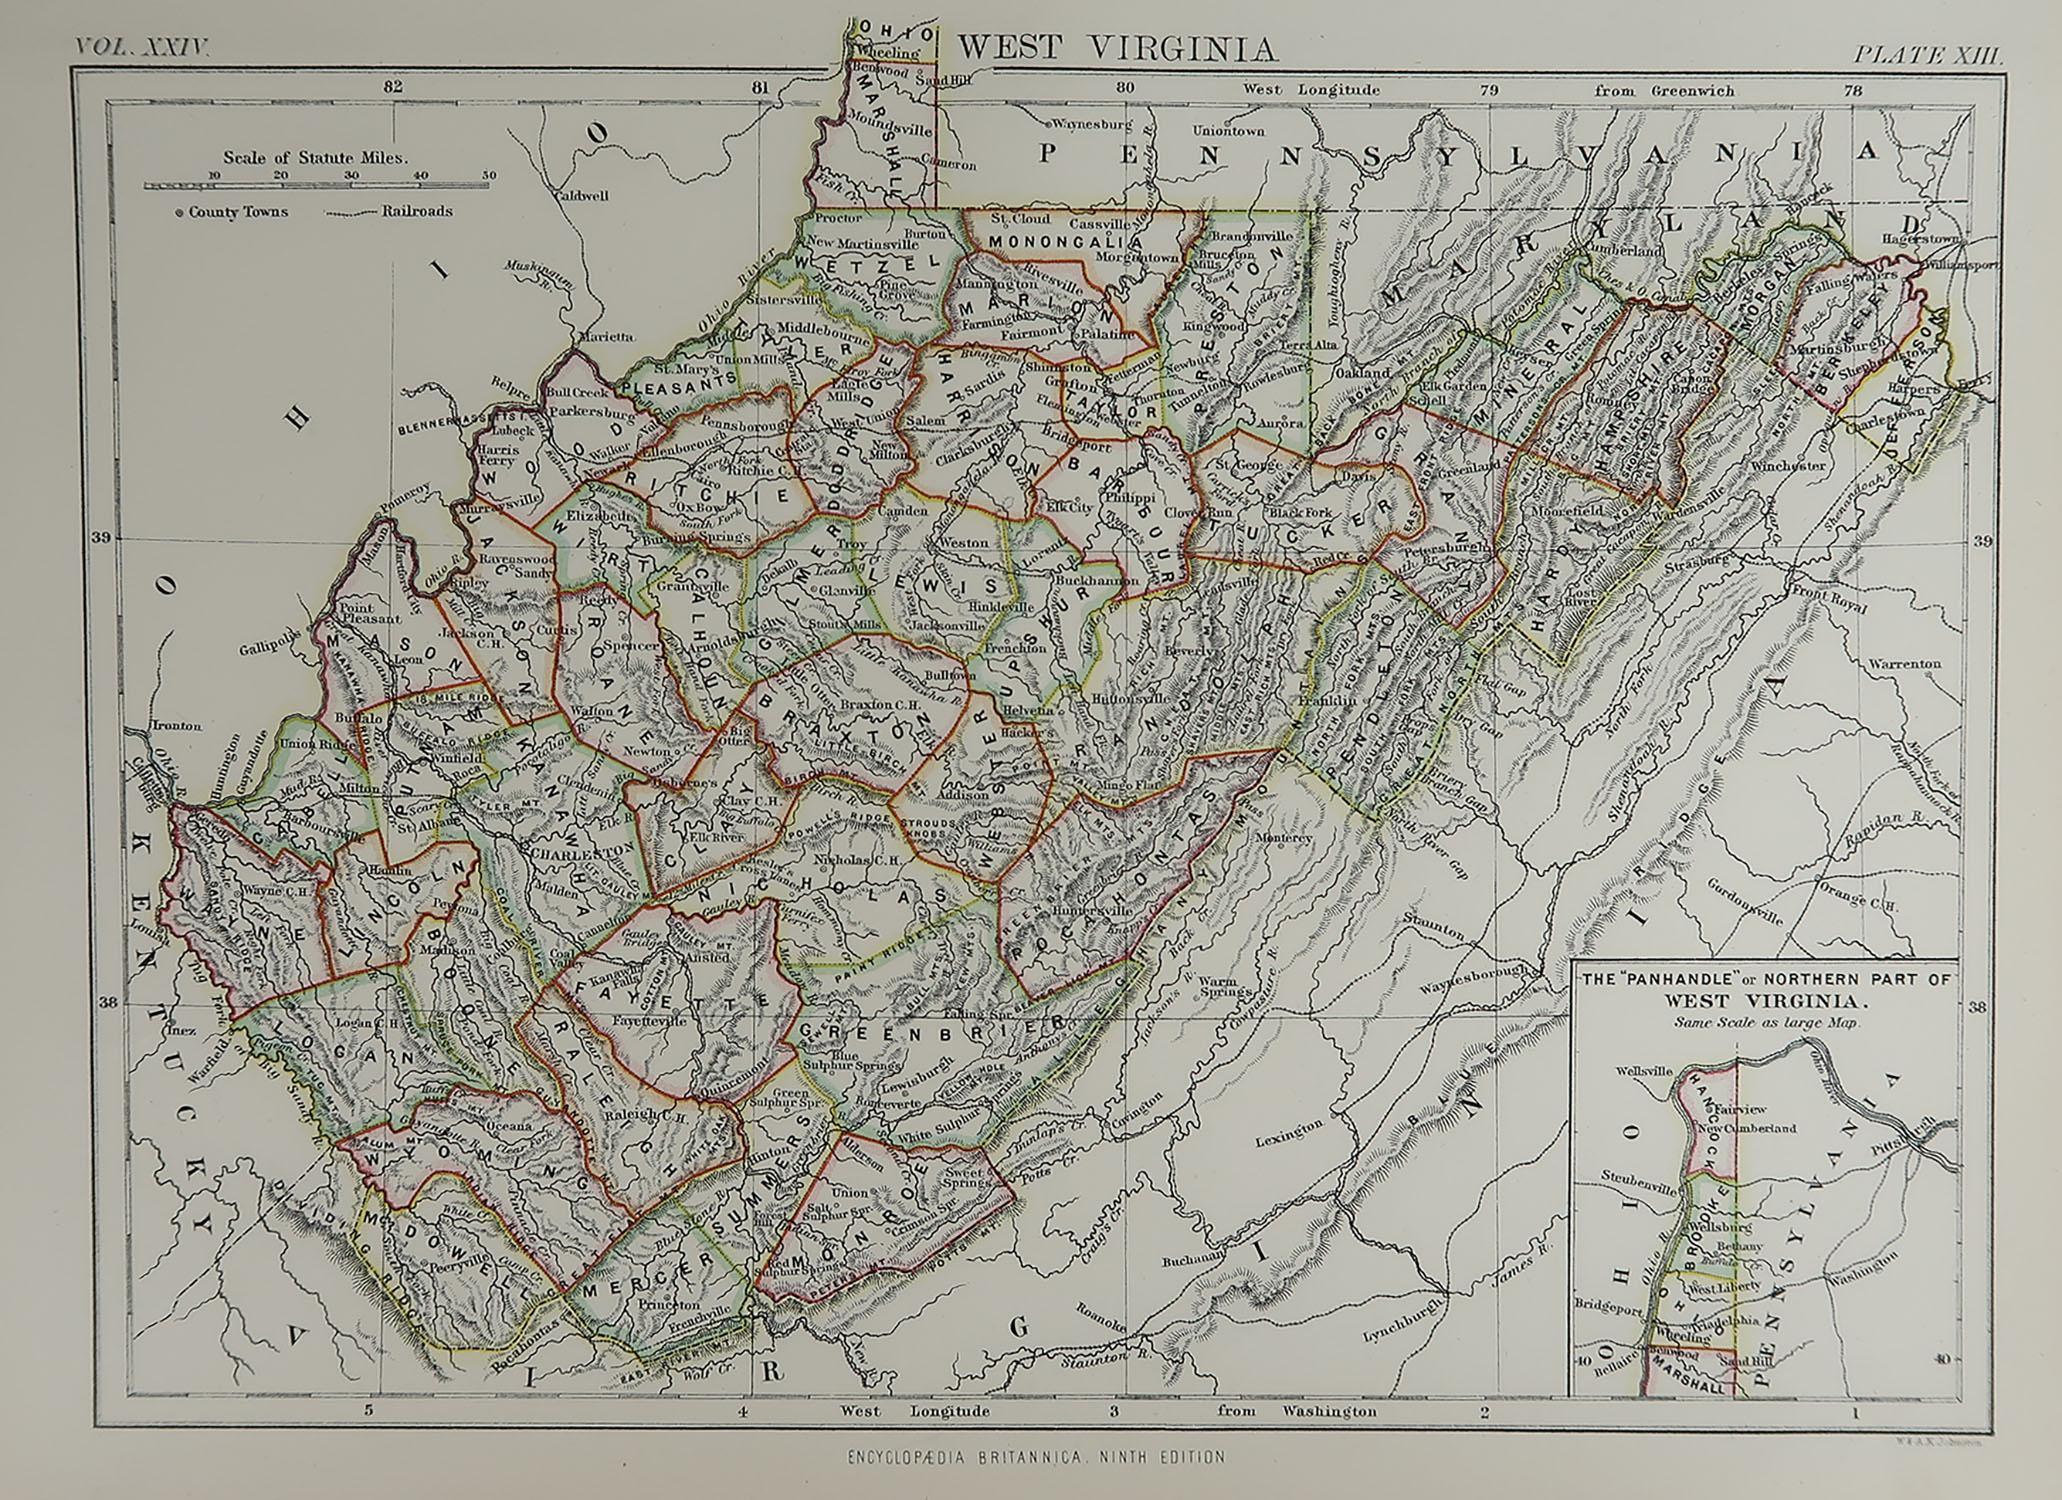 Great map of West Virginia

Drawn and Engraved by W. & A.K. Johnston

Published By A & C Black, Edinburgh.

Original colour

Unframed








  